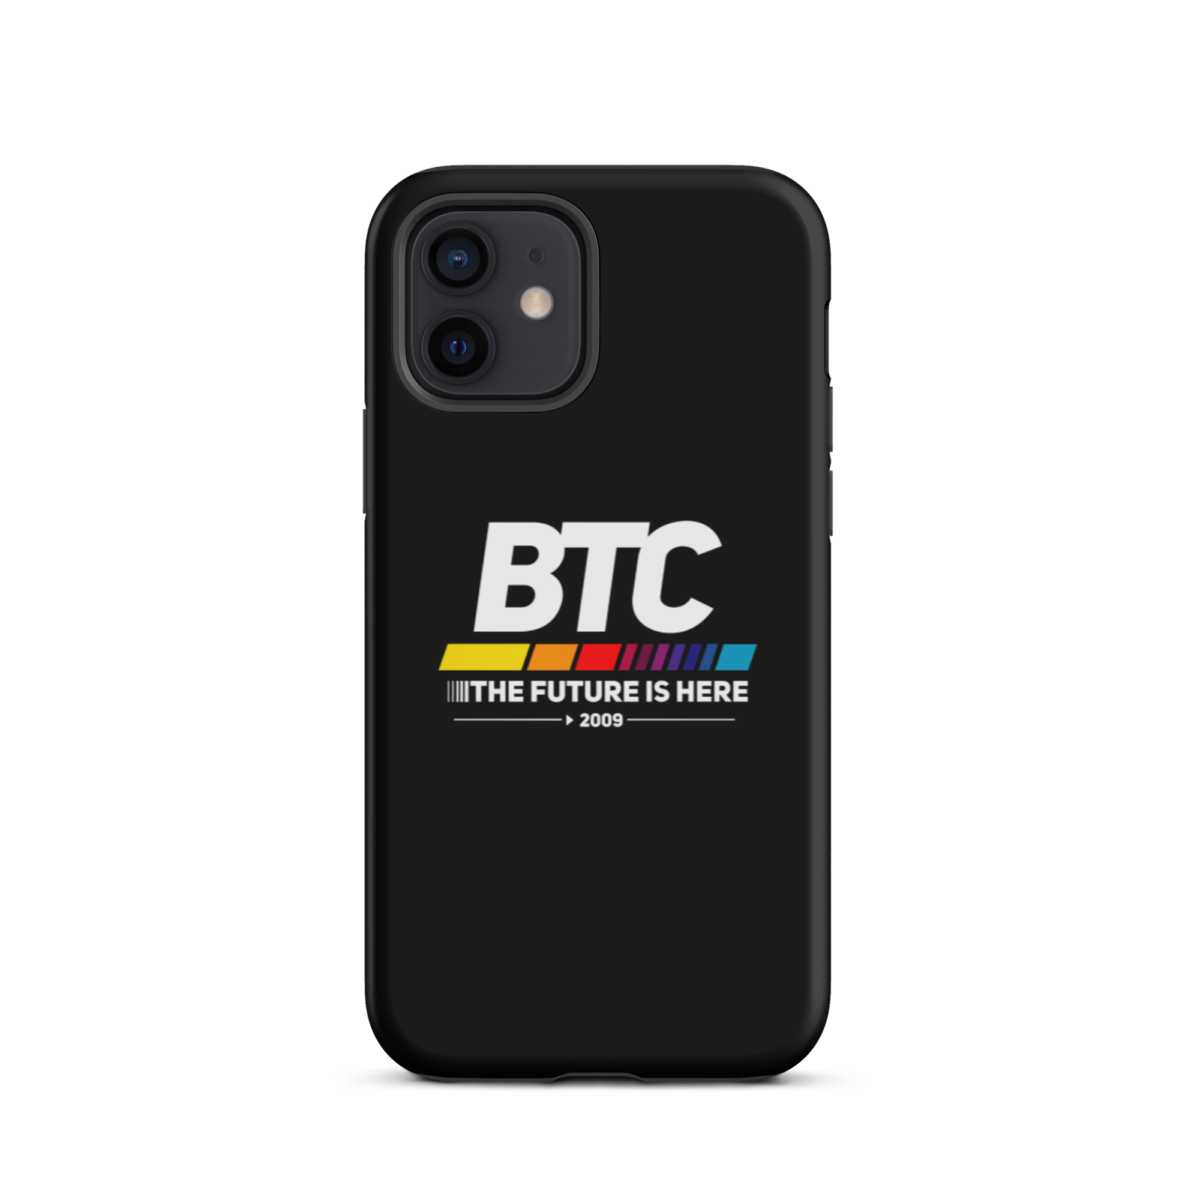 tough iphone case glossy iphone 12 front 6345d56a310fd - BTC: The Future Is Here Tough iPhone Case